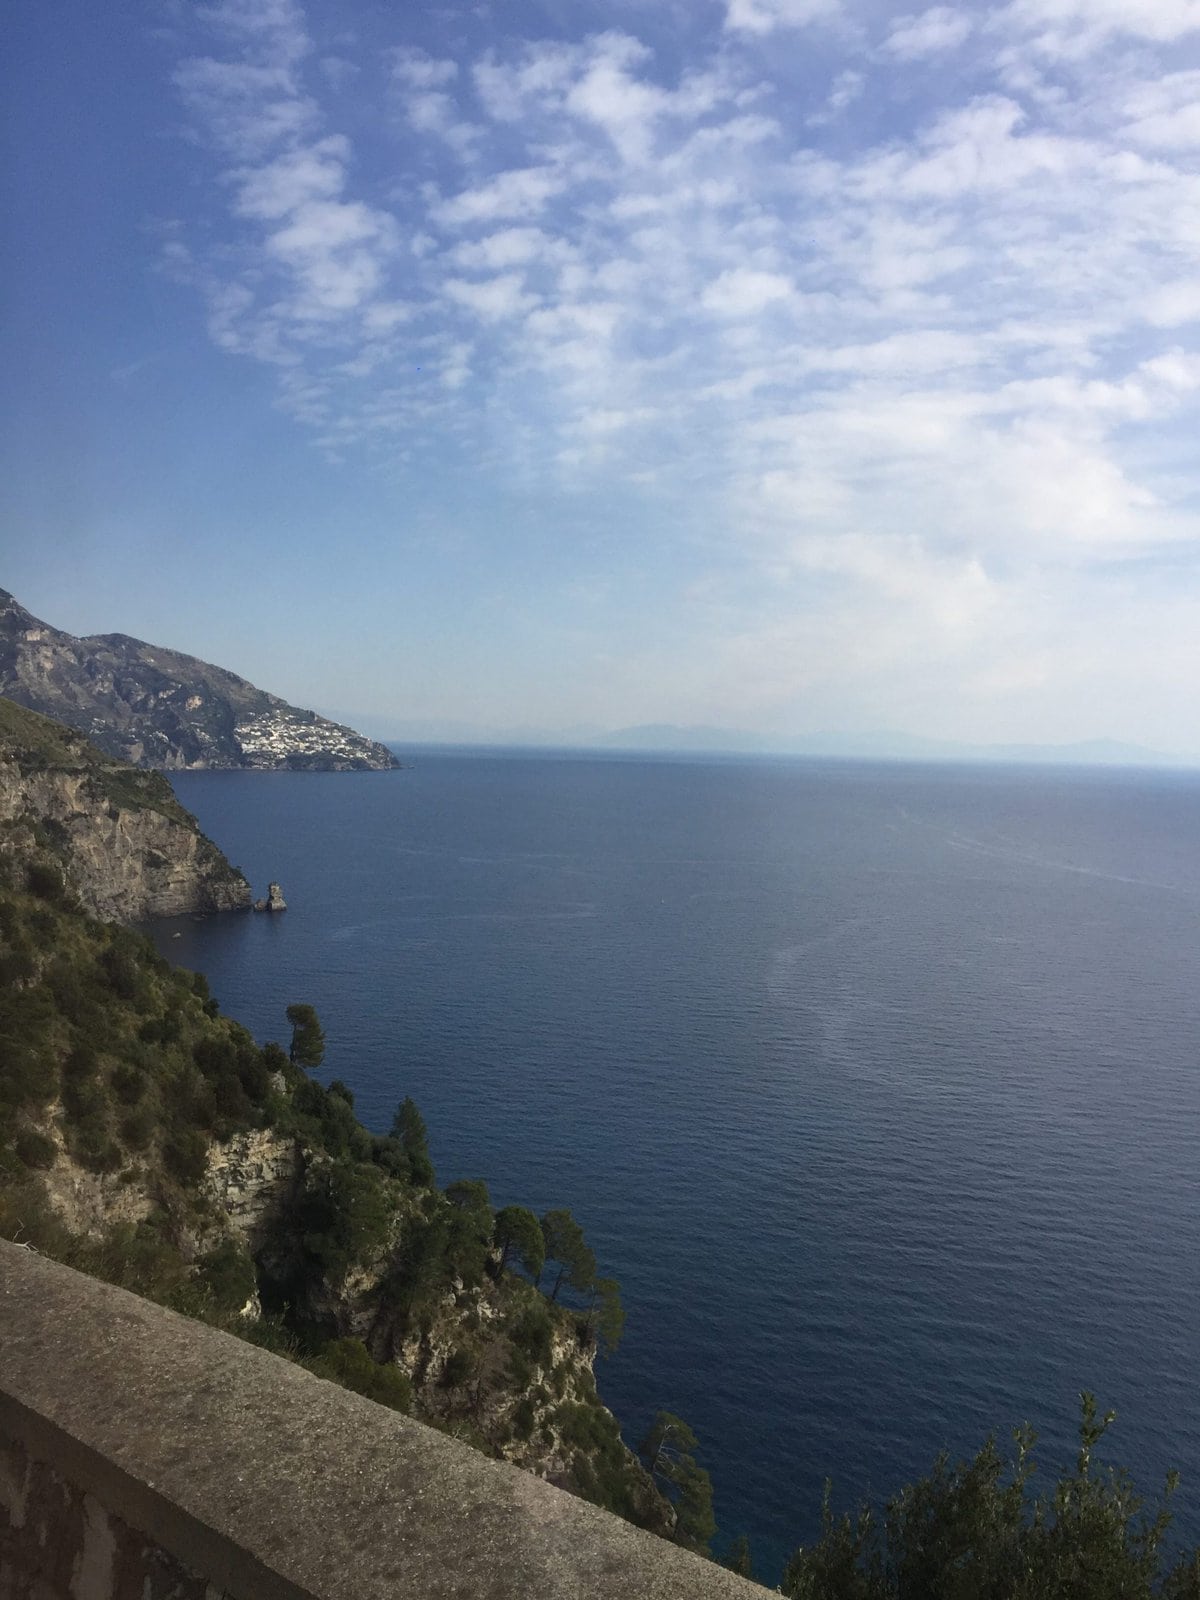 What you Need to Know Before Visiting Pompeii and Positano It would be very difficult for me to pick a single experience from our Italy trip as my favorite. Honestly, the trip was a dream come true.